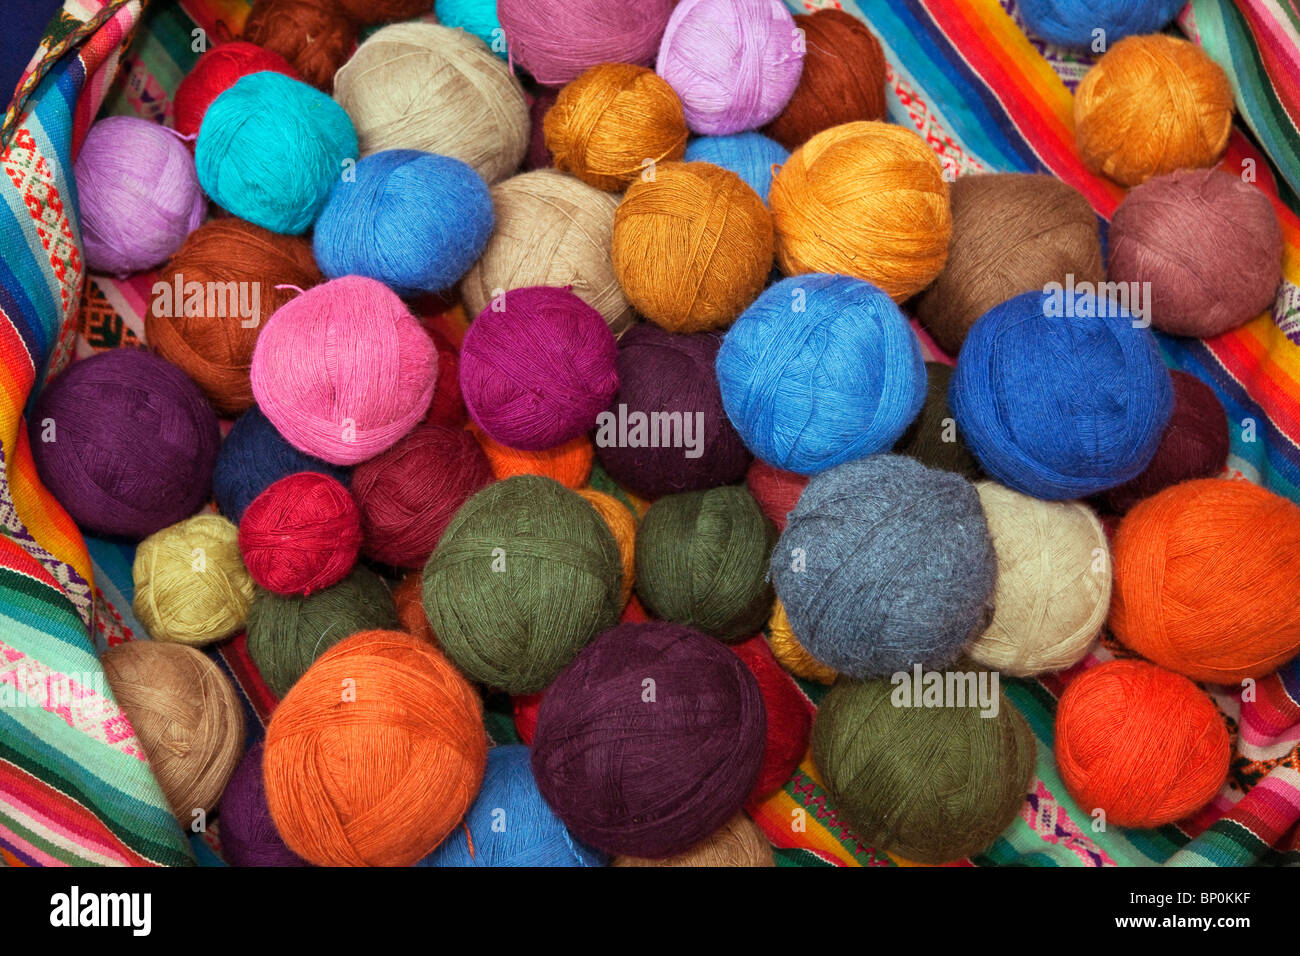 Peru, Balls of wool dyed in bright colours by Chinchero weavers using vegetable dyes in the traditional manner. Stock Photo